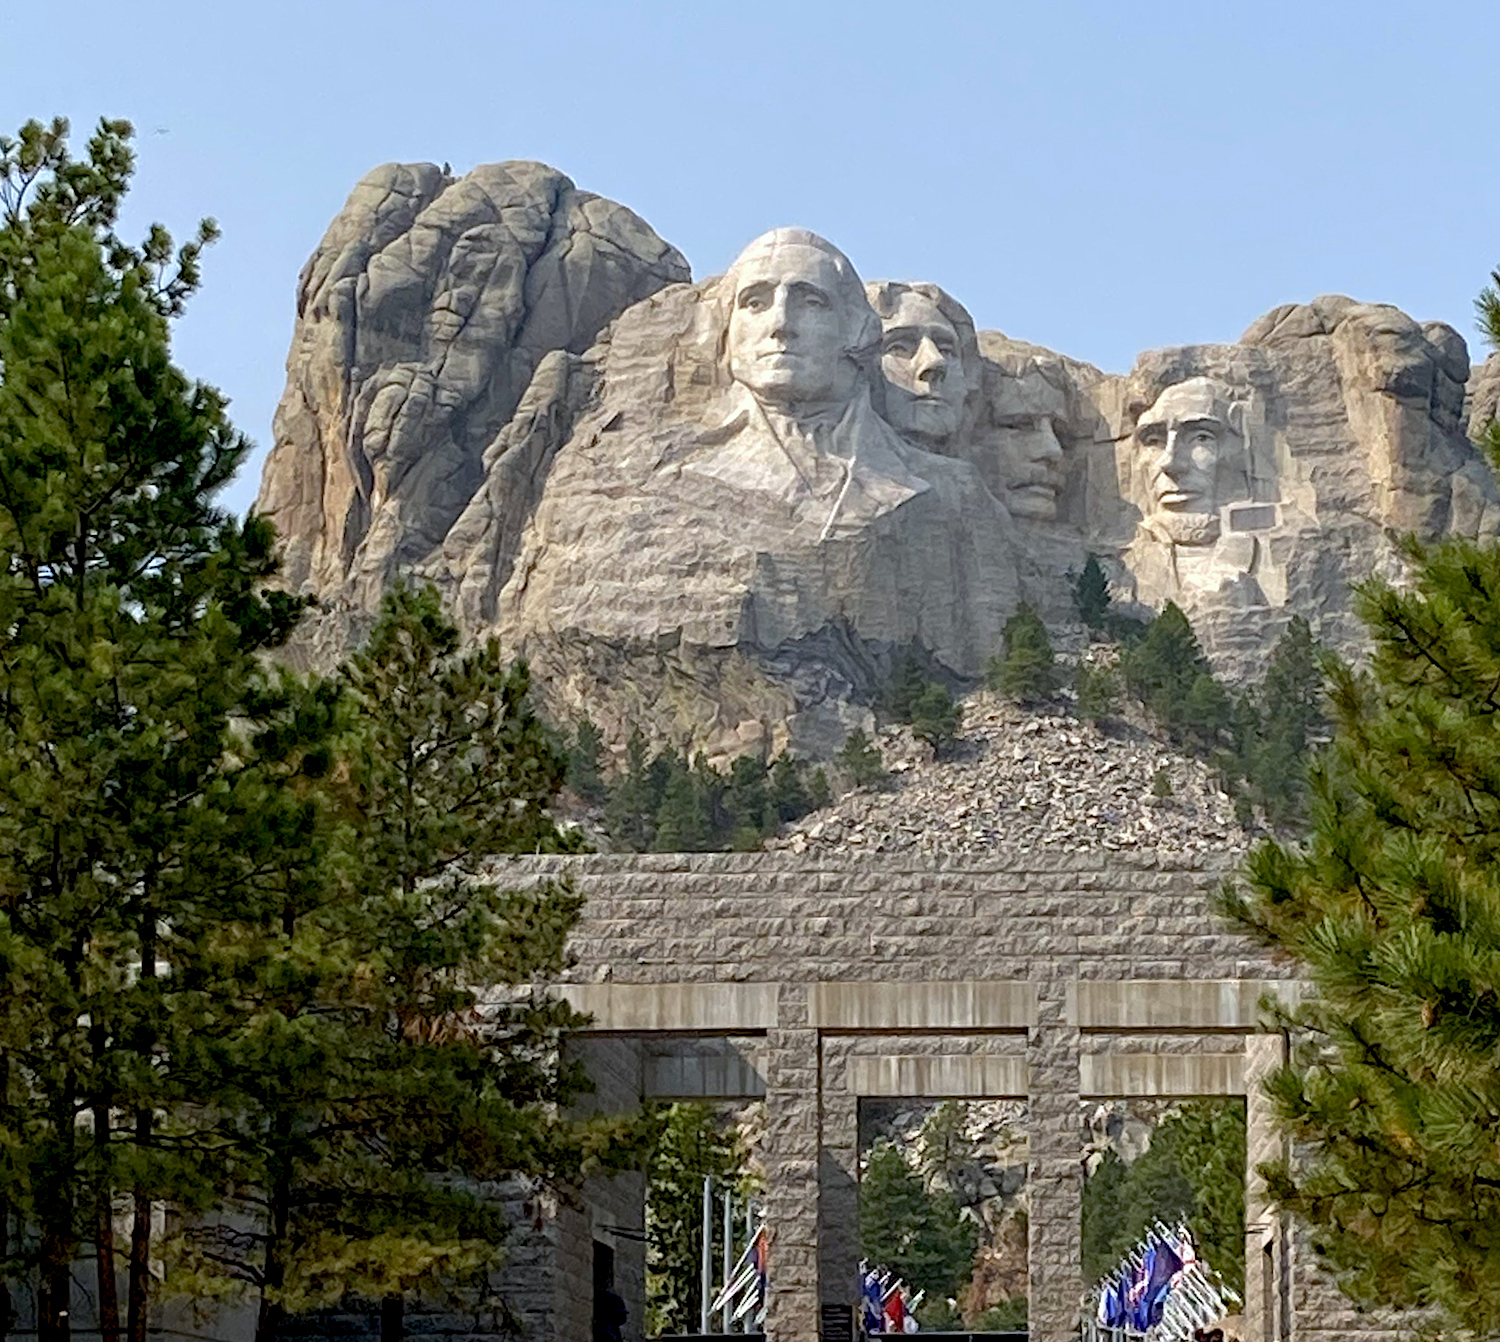 Our Mount Rushmore Visit was Awesome!